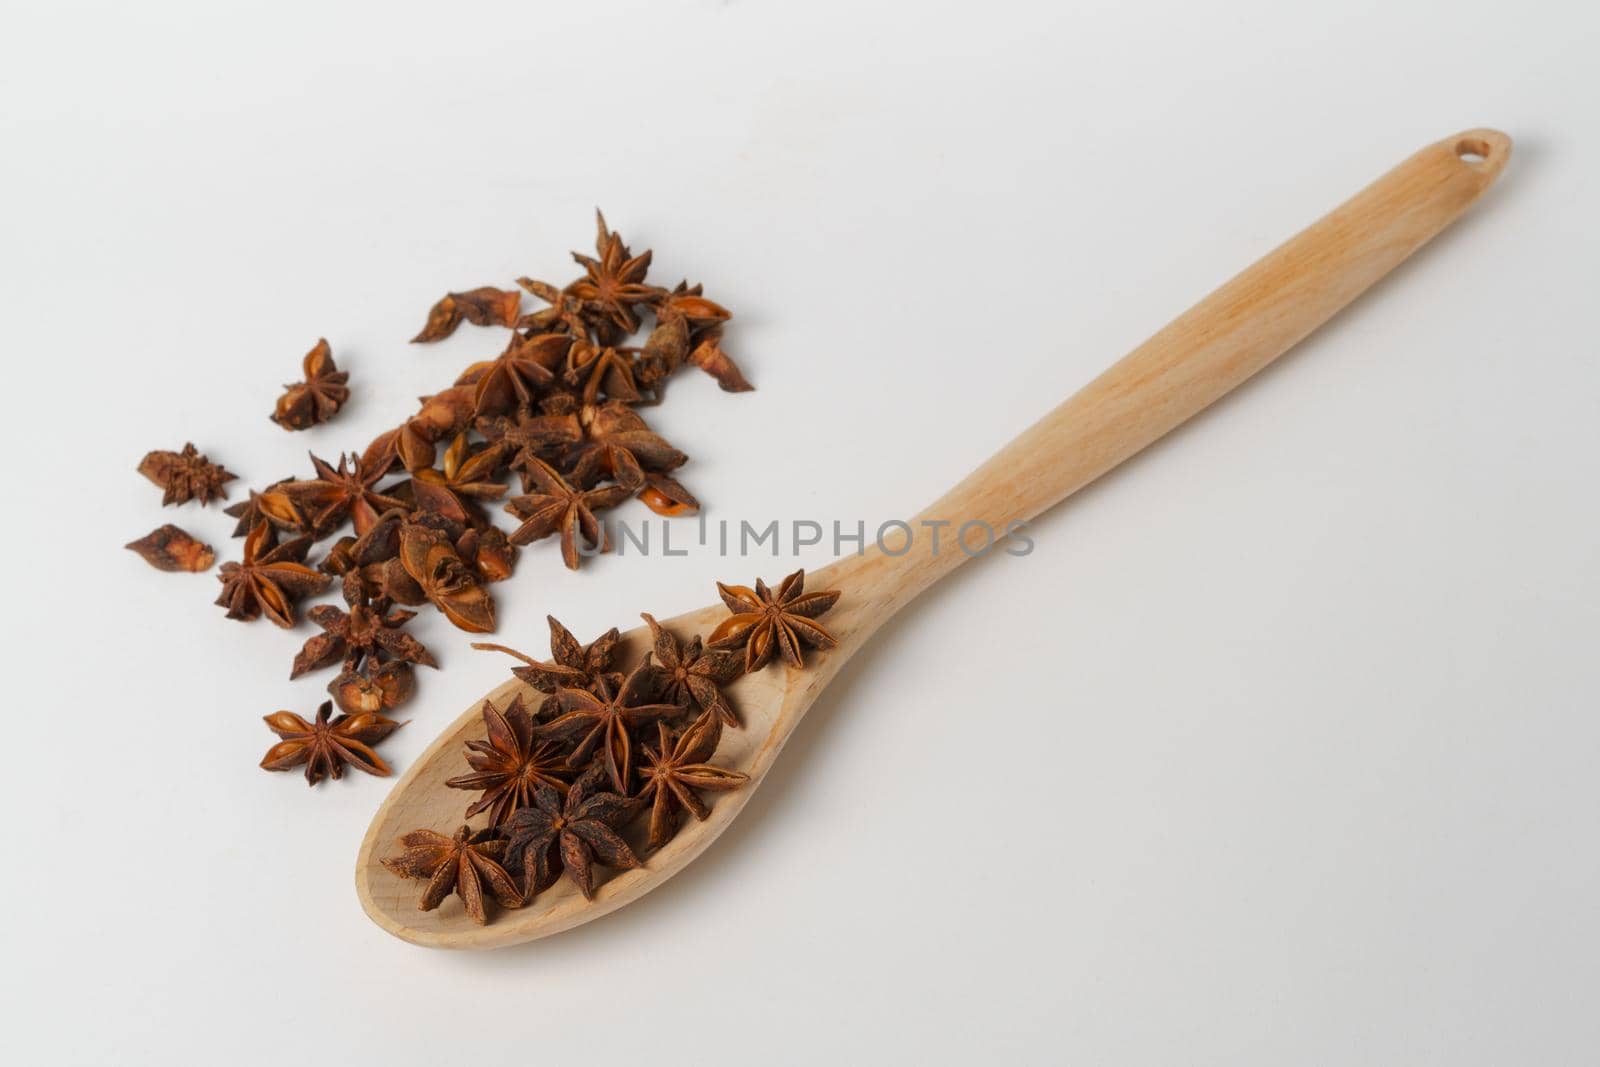 close-up of star anise illicium verum in a wooden spoon isolated on white background and copy space